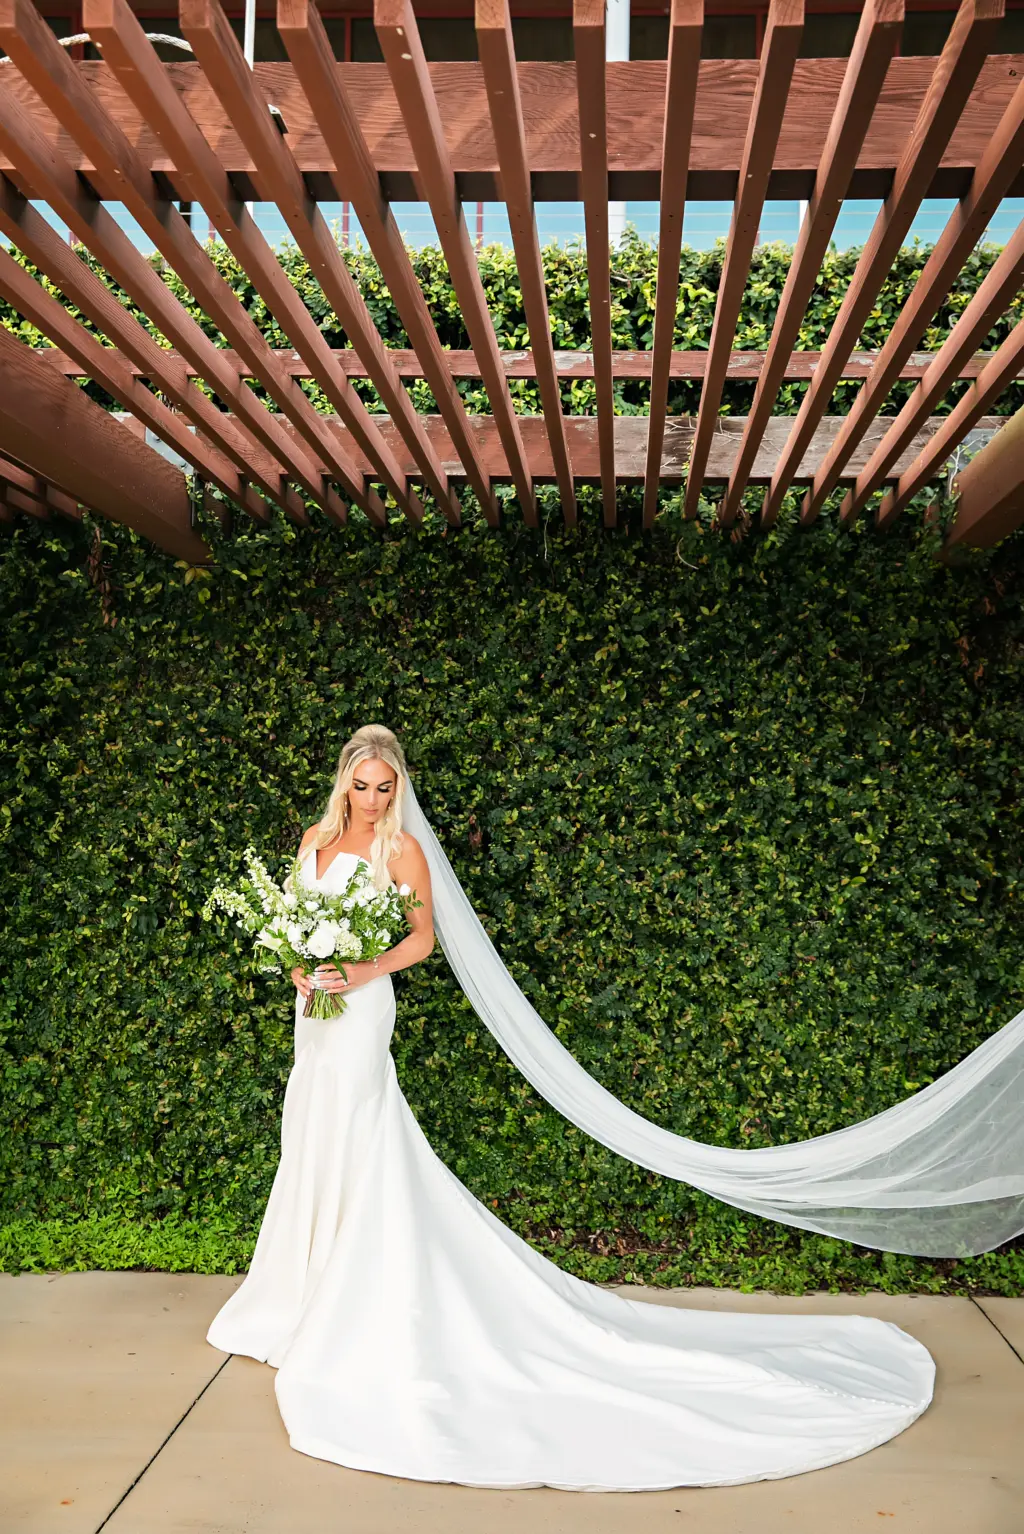 White Classic Satin Wedding Dress with Chapel Length Veil Inspiration | Tampa Bay Photographer Limelight Photography